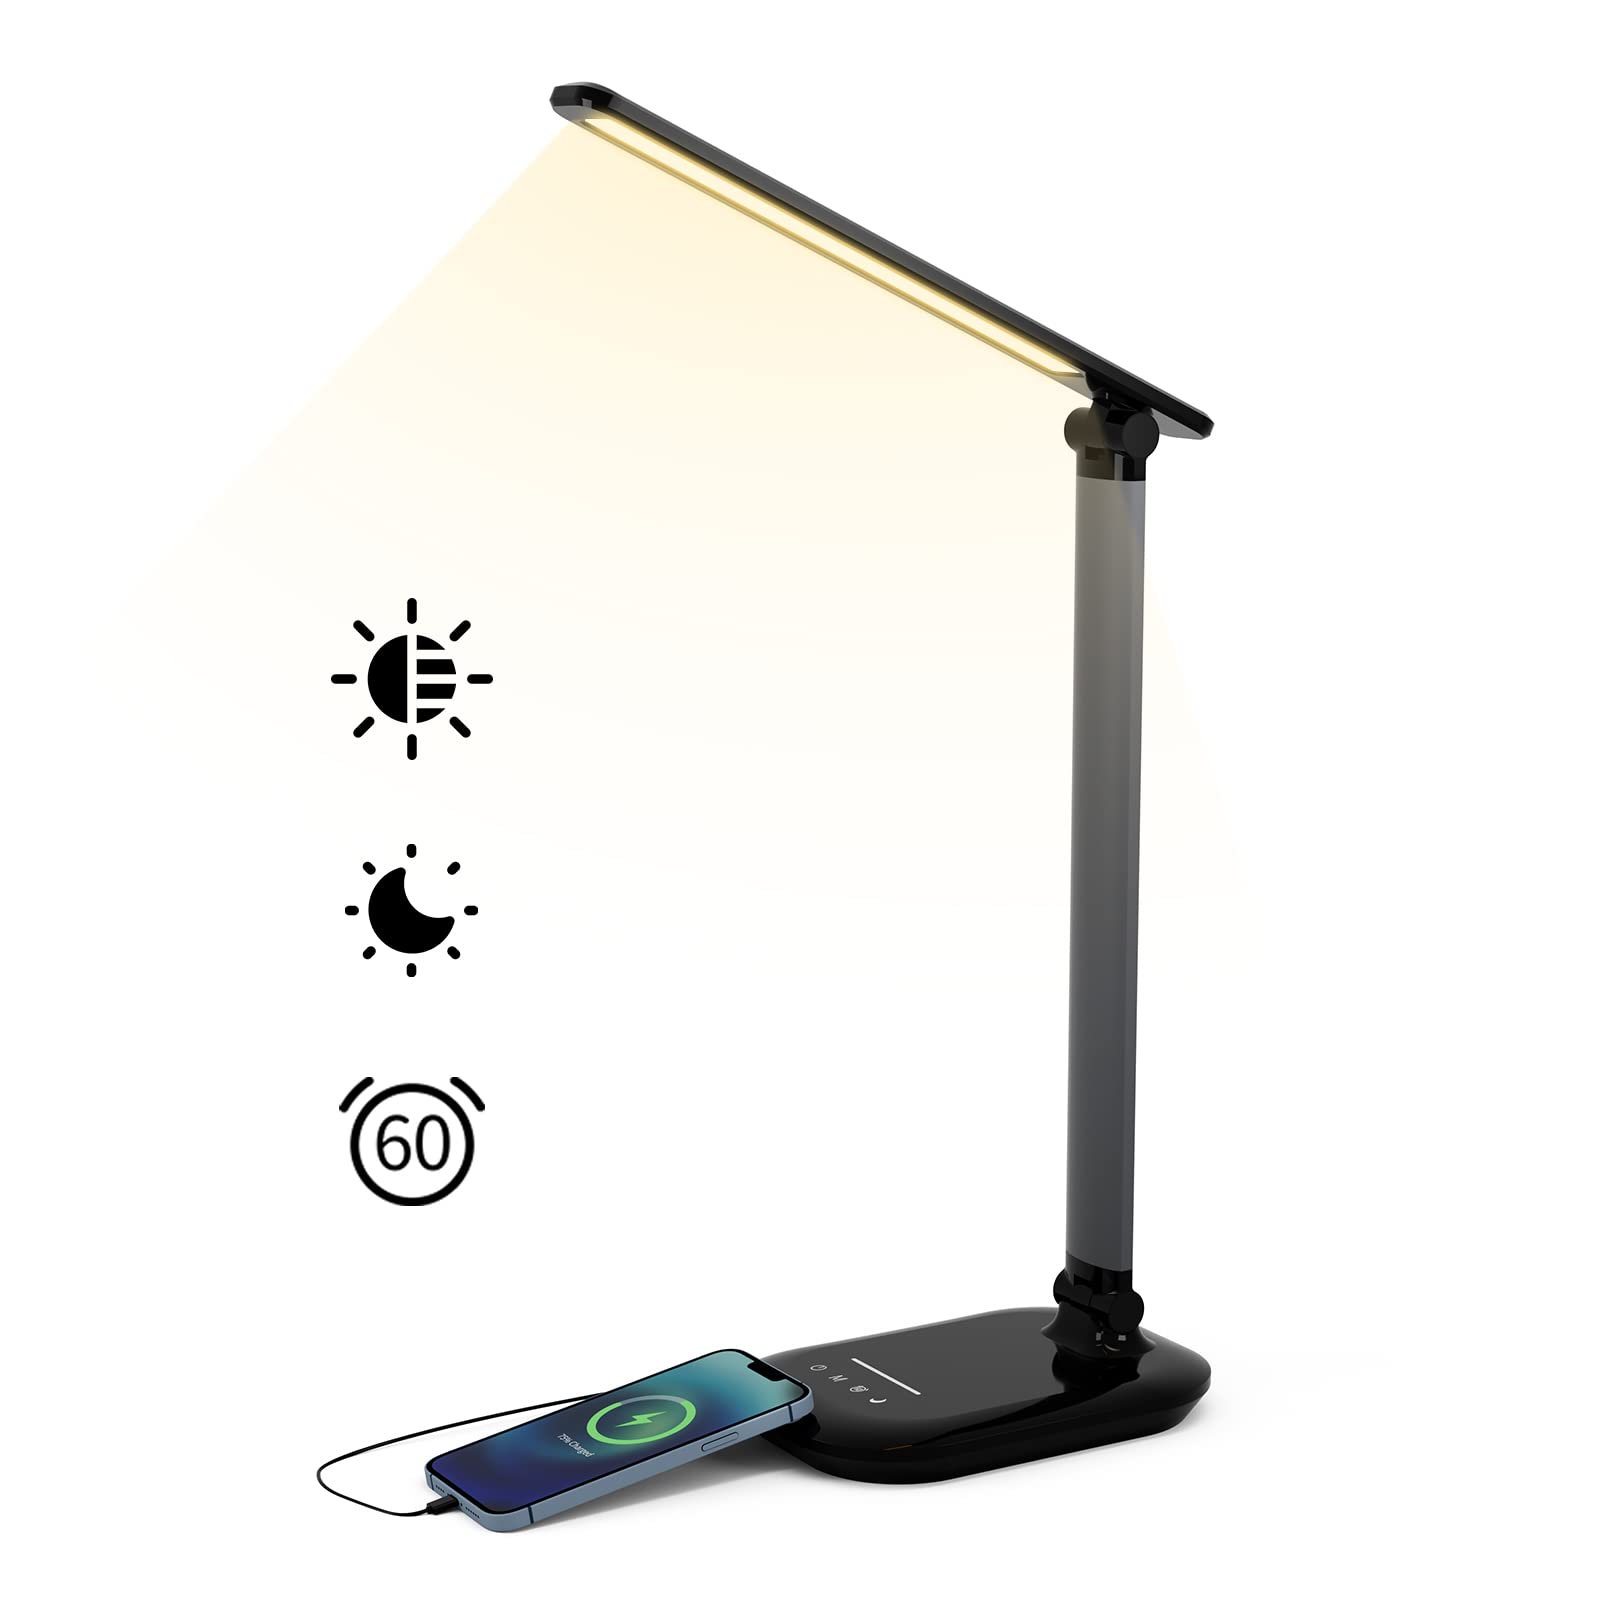 Taodaliy LED Desk Lamp, Table Lamp Reading Lamp with USB Charging Port, Desk Lamps for Home Office with 5 Color Temperature, 5 Brightness Levels, 1H Timer, Night Light, Desk Light for Bedroom